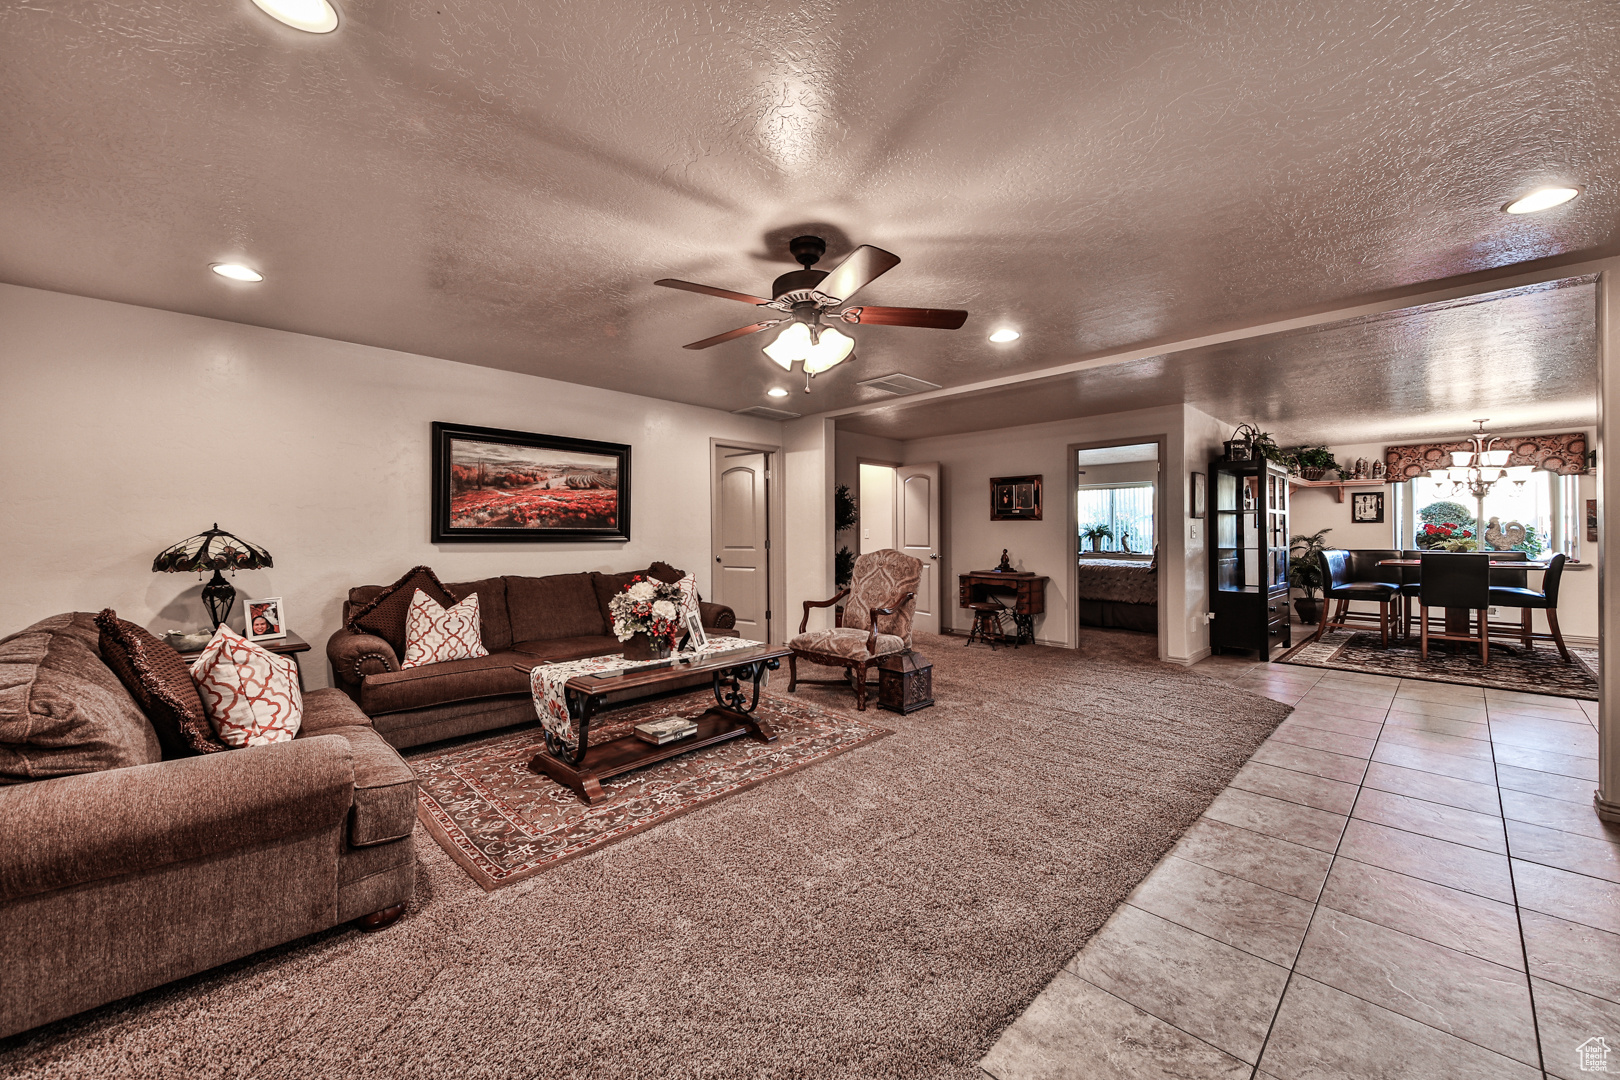 Carpeted living room with ceiling fan with notable chandelier and a textured ceiling